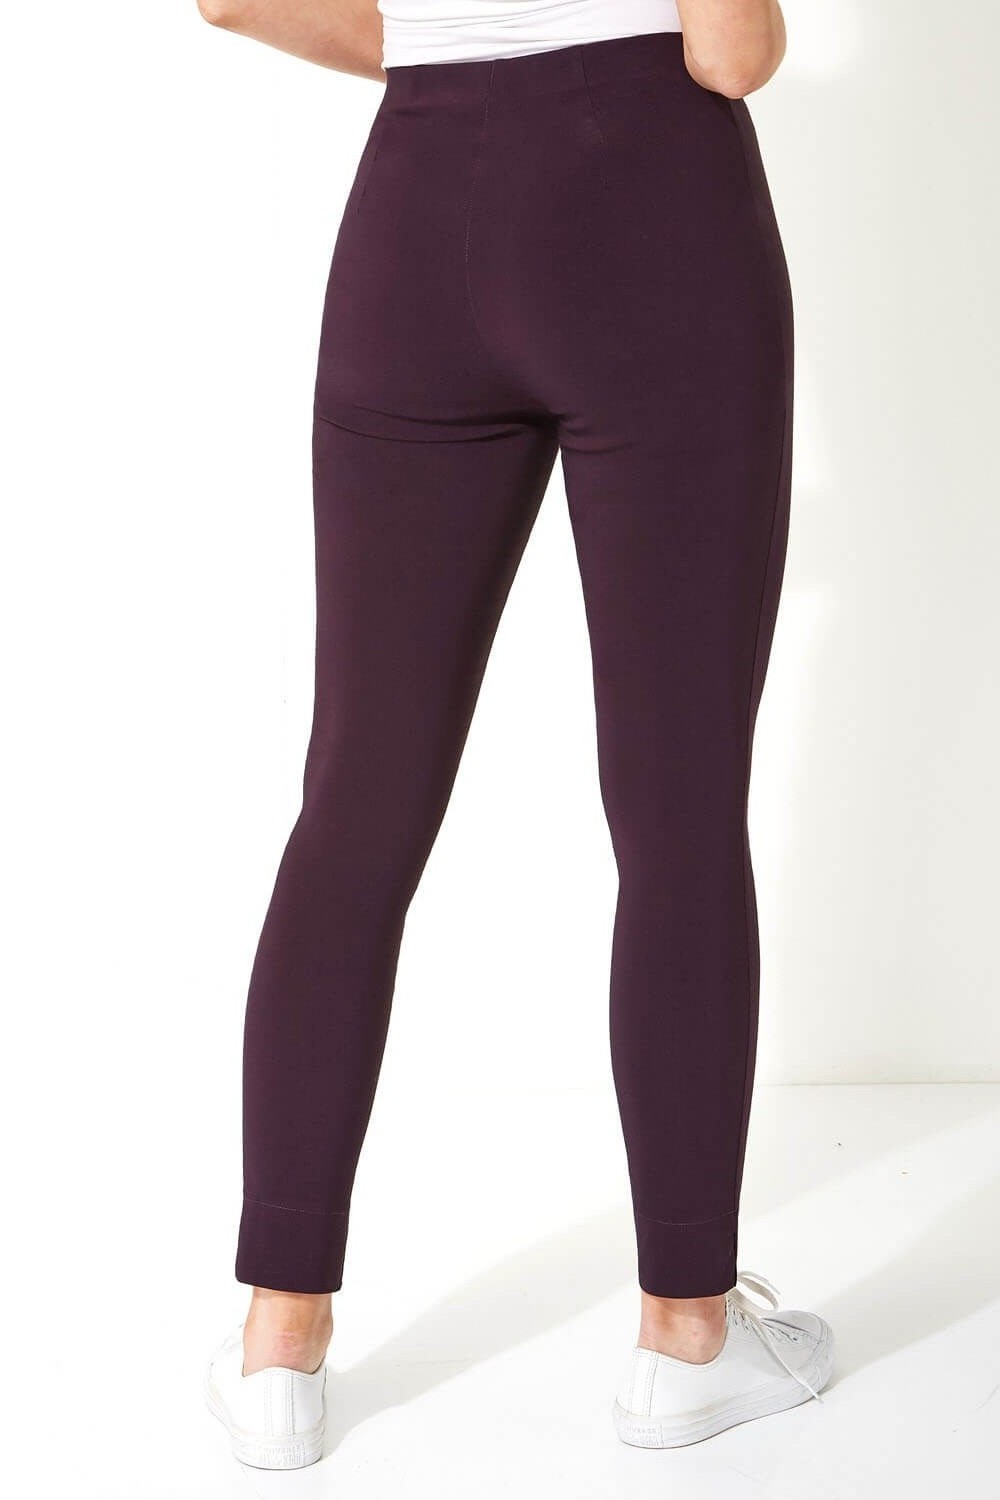 Aubergine Full Length Stretch Trousers, Image 3 of 6